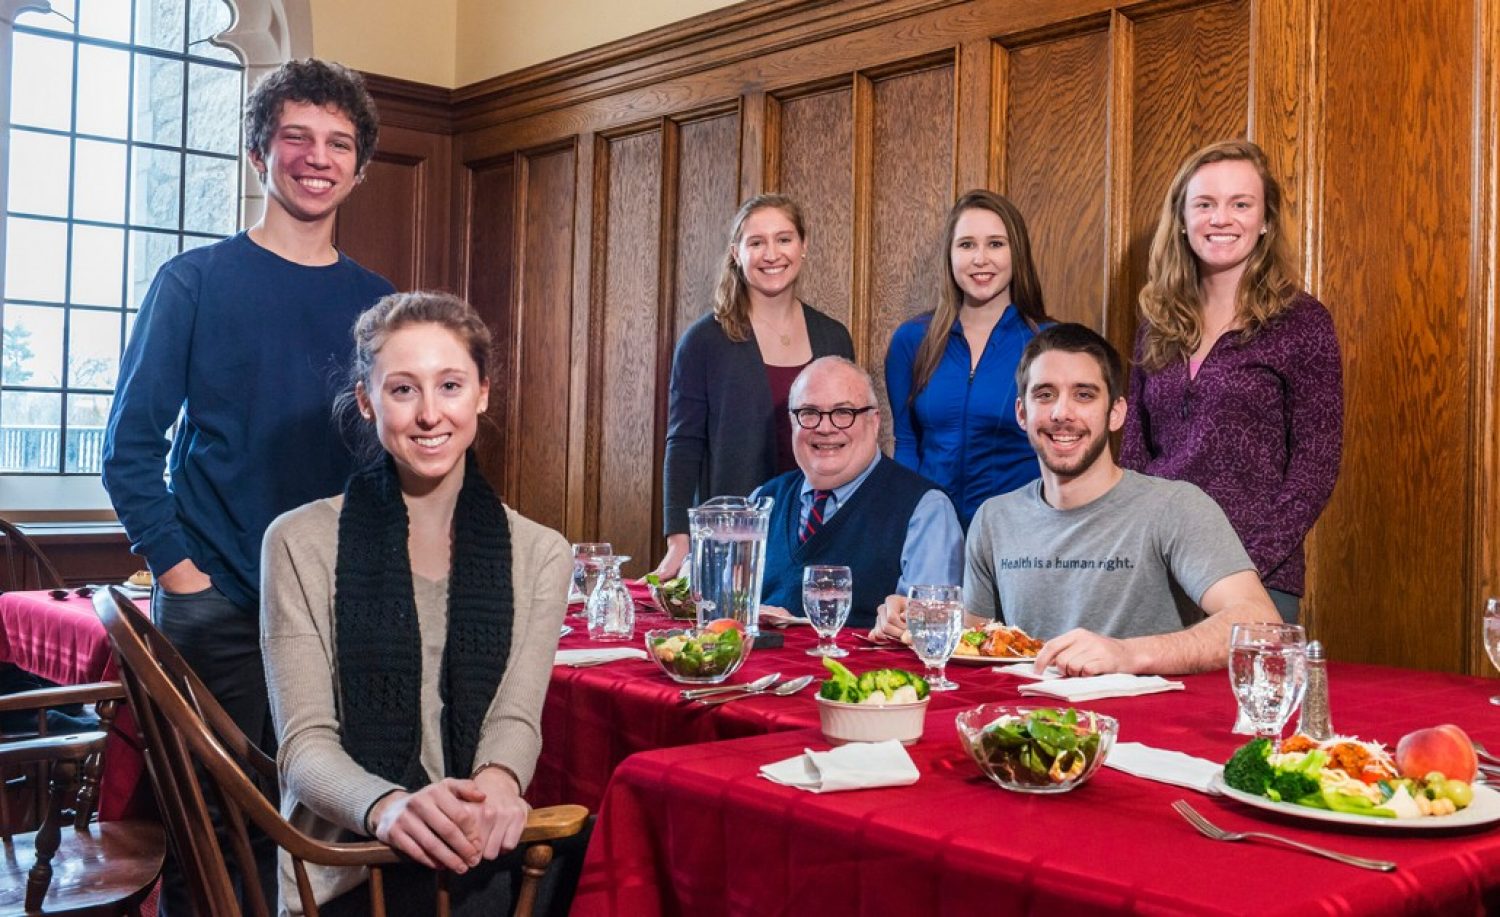 A group of BC undergraduates with Fr. Mark Massa, S.J., at a "Lunches with Jesuits" event